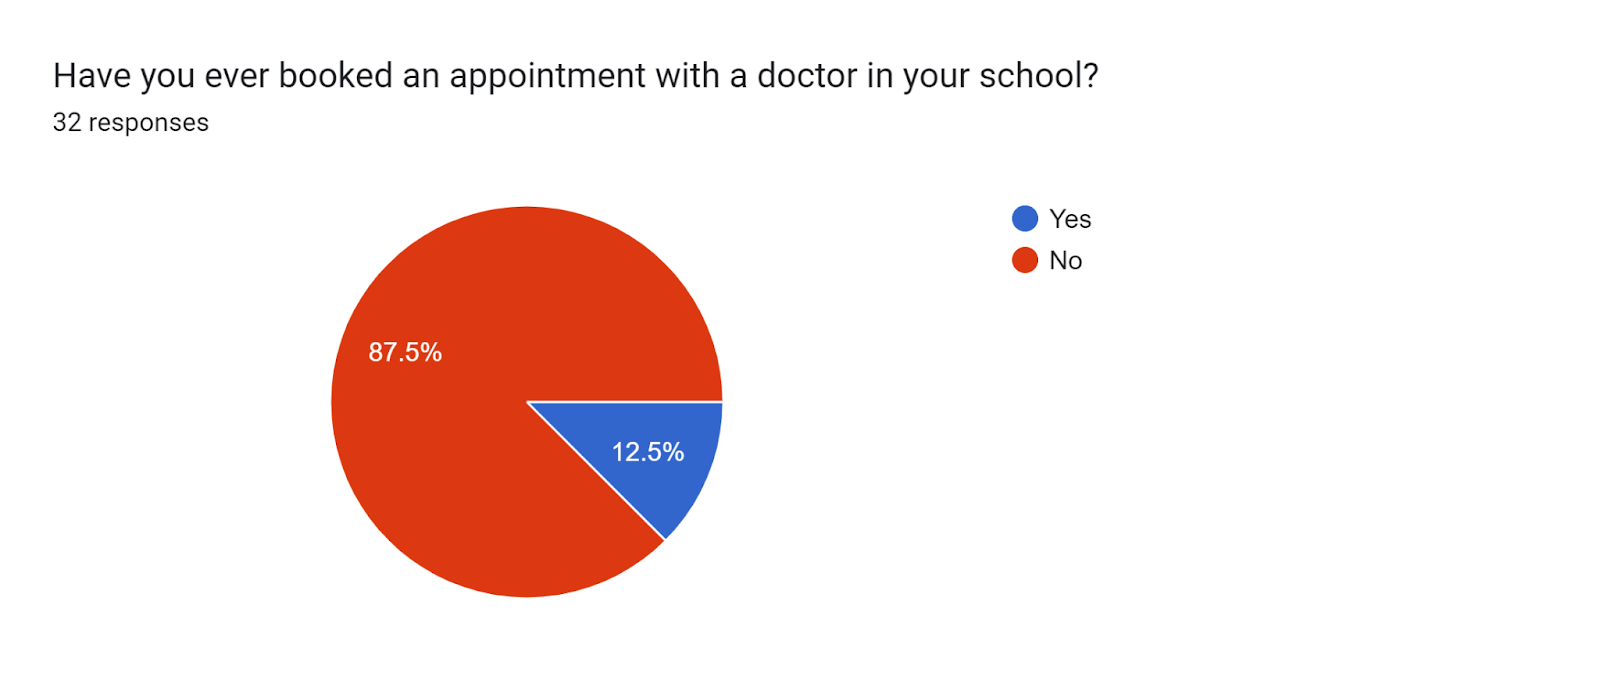 A Pie Chart depicting that 87.5% (28 out of 32 respondents) of students have never booked an appointment with a doctor in their schools. 